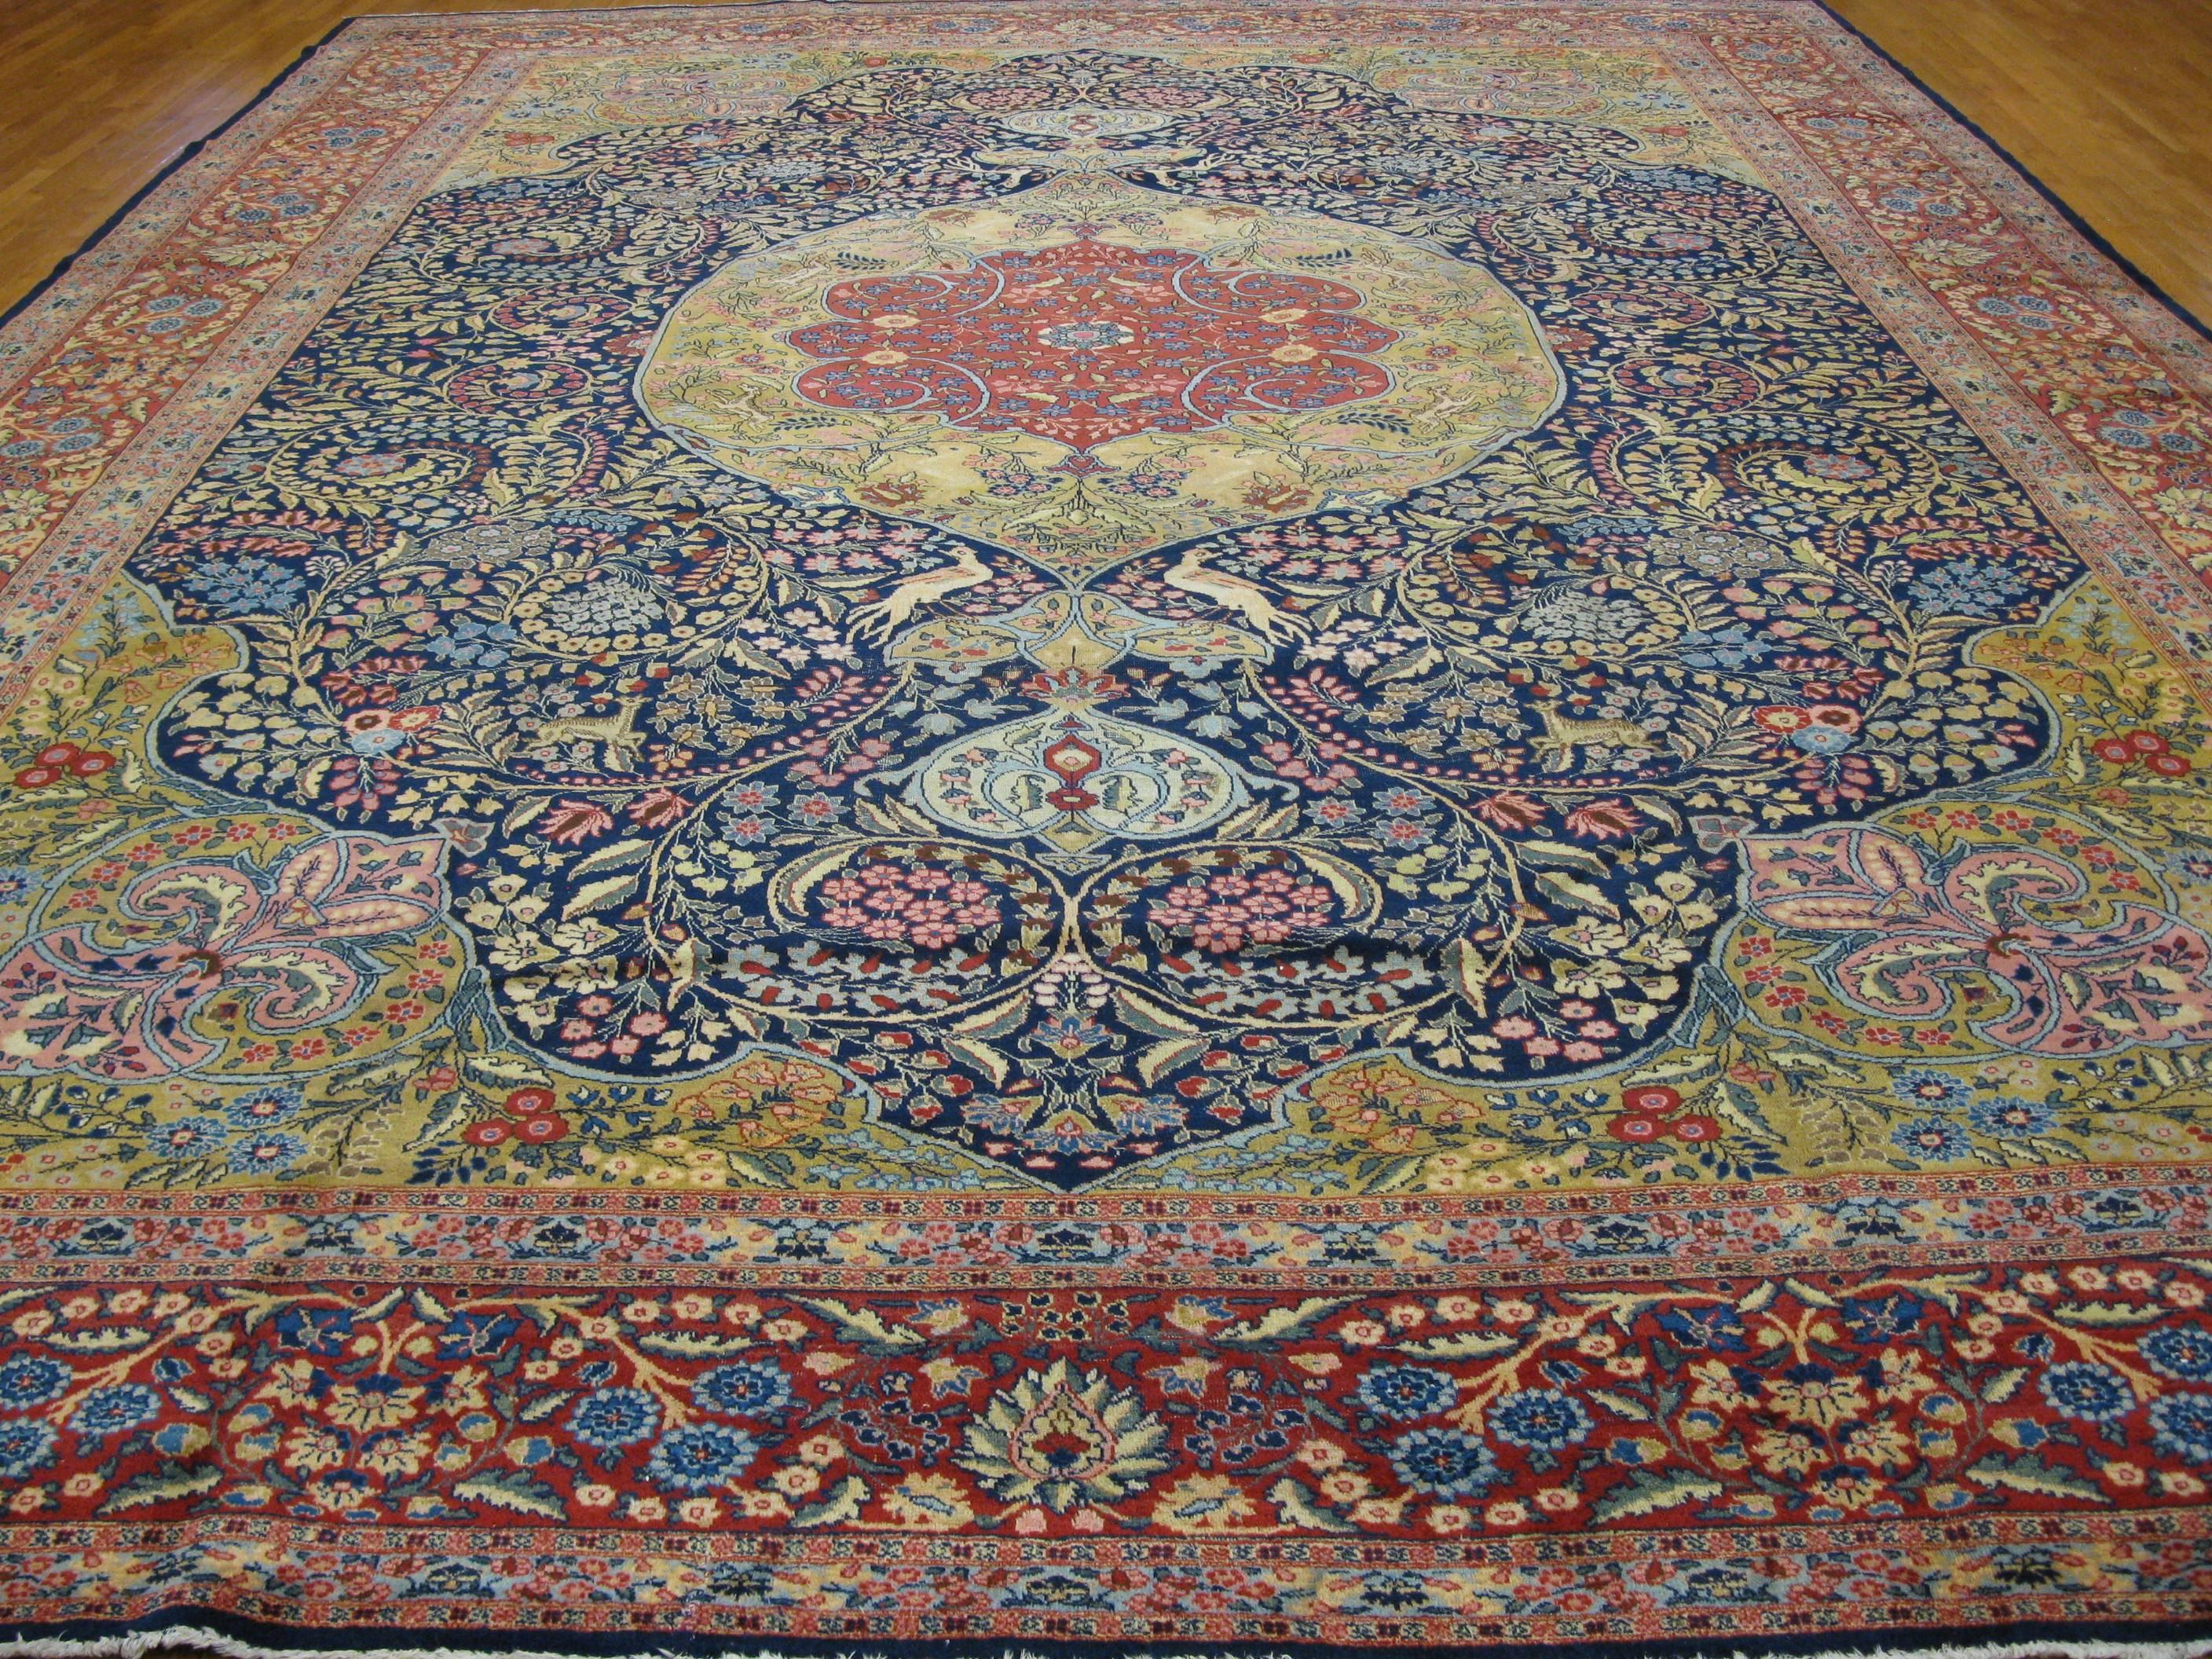 This is a fantastic large antique Persian Tabriz rug in a detailed traditional floral design. It measures 13' 2'' x 17' 9'' made with fine wool from northwest Iran on a cotton foundation. The rug is in great condition.